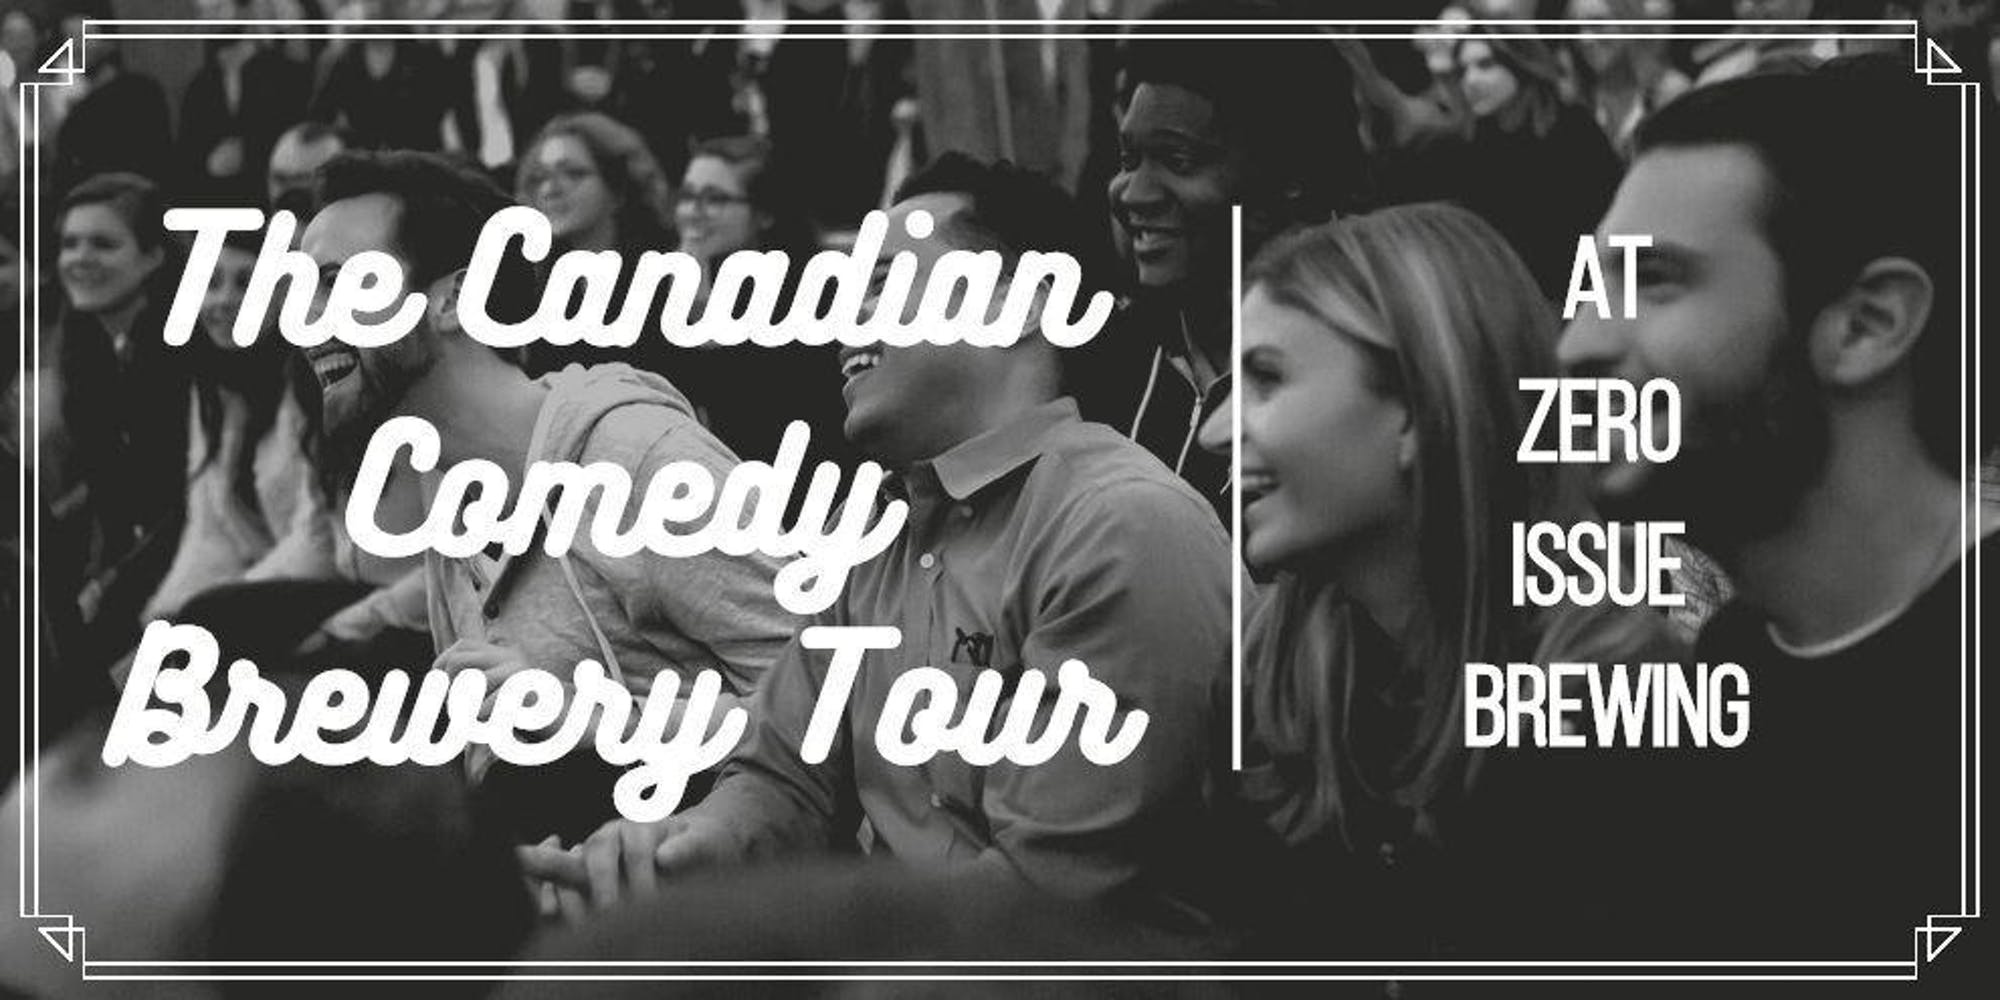 The Canadian Comedy Brewery Tour @ Zero Issue Brewing Co. 